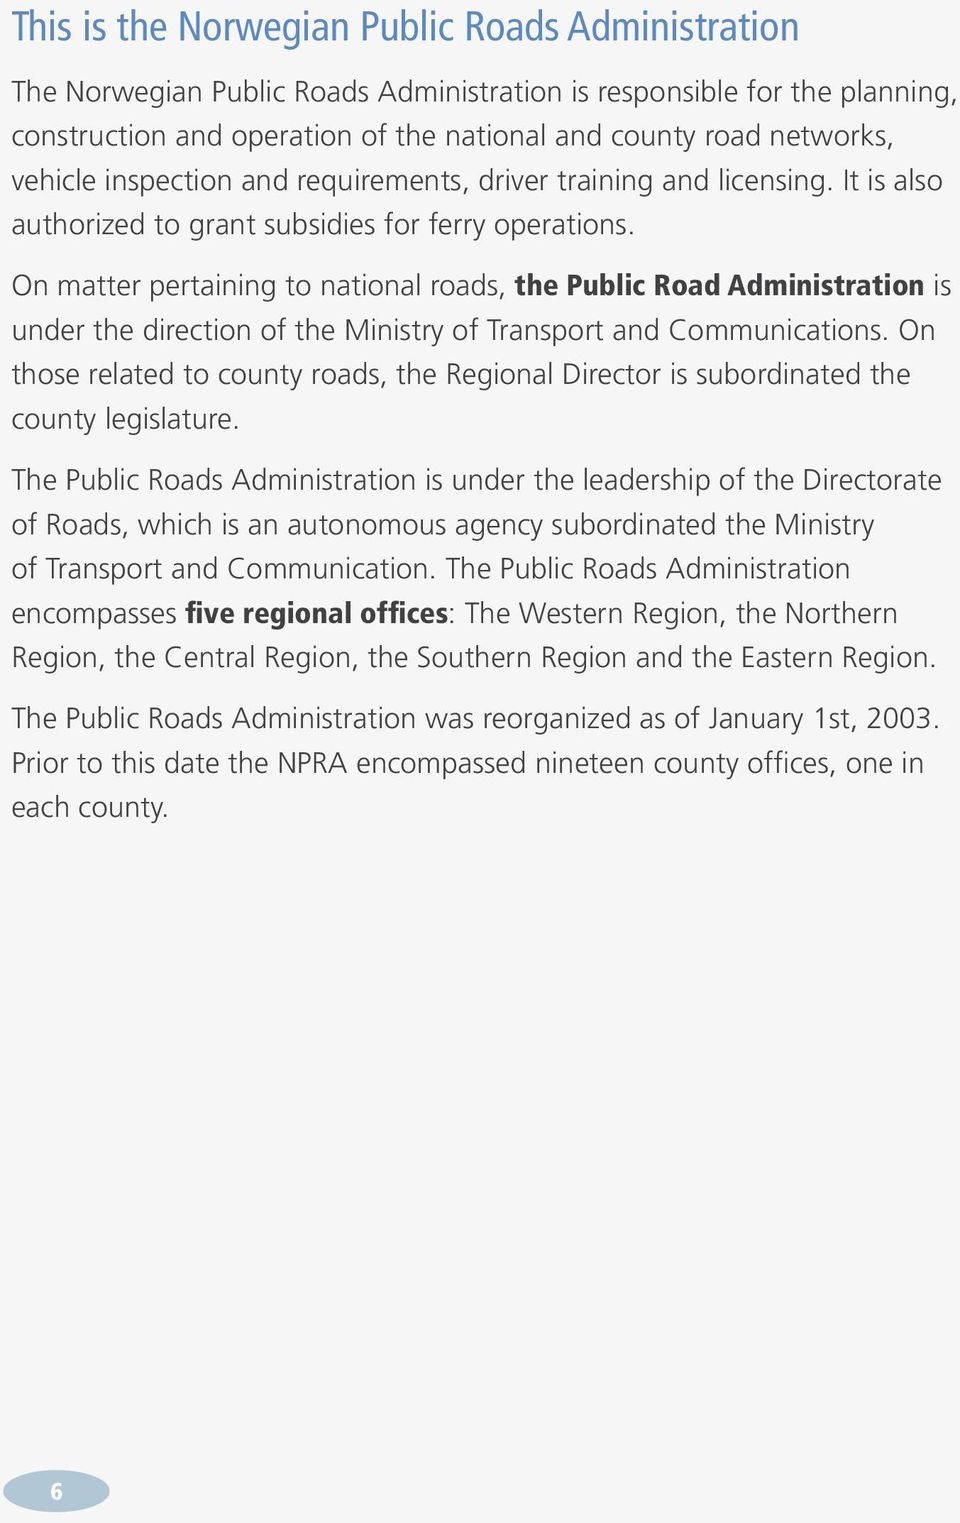 On matter pertaining to national roads, the Public Road Administration is under the direction of the Ministry of Transport and Communications.